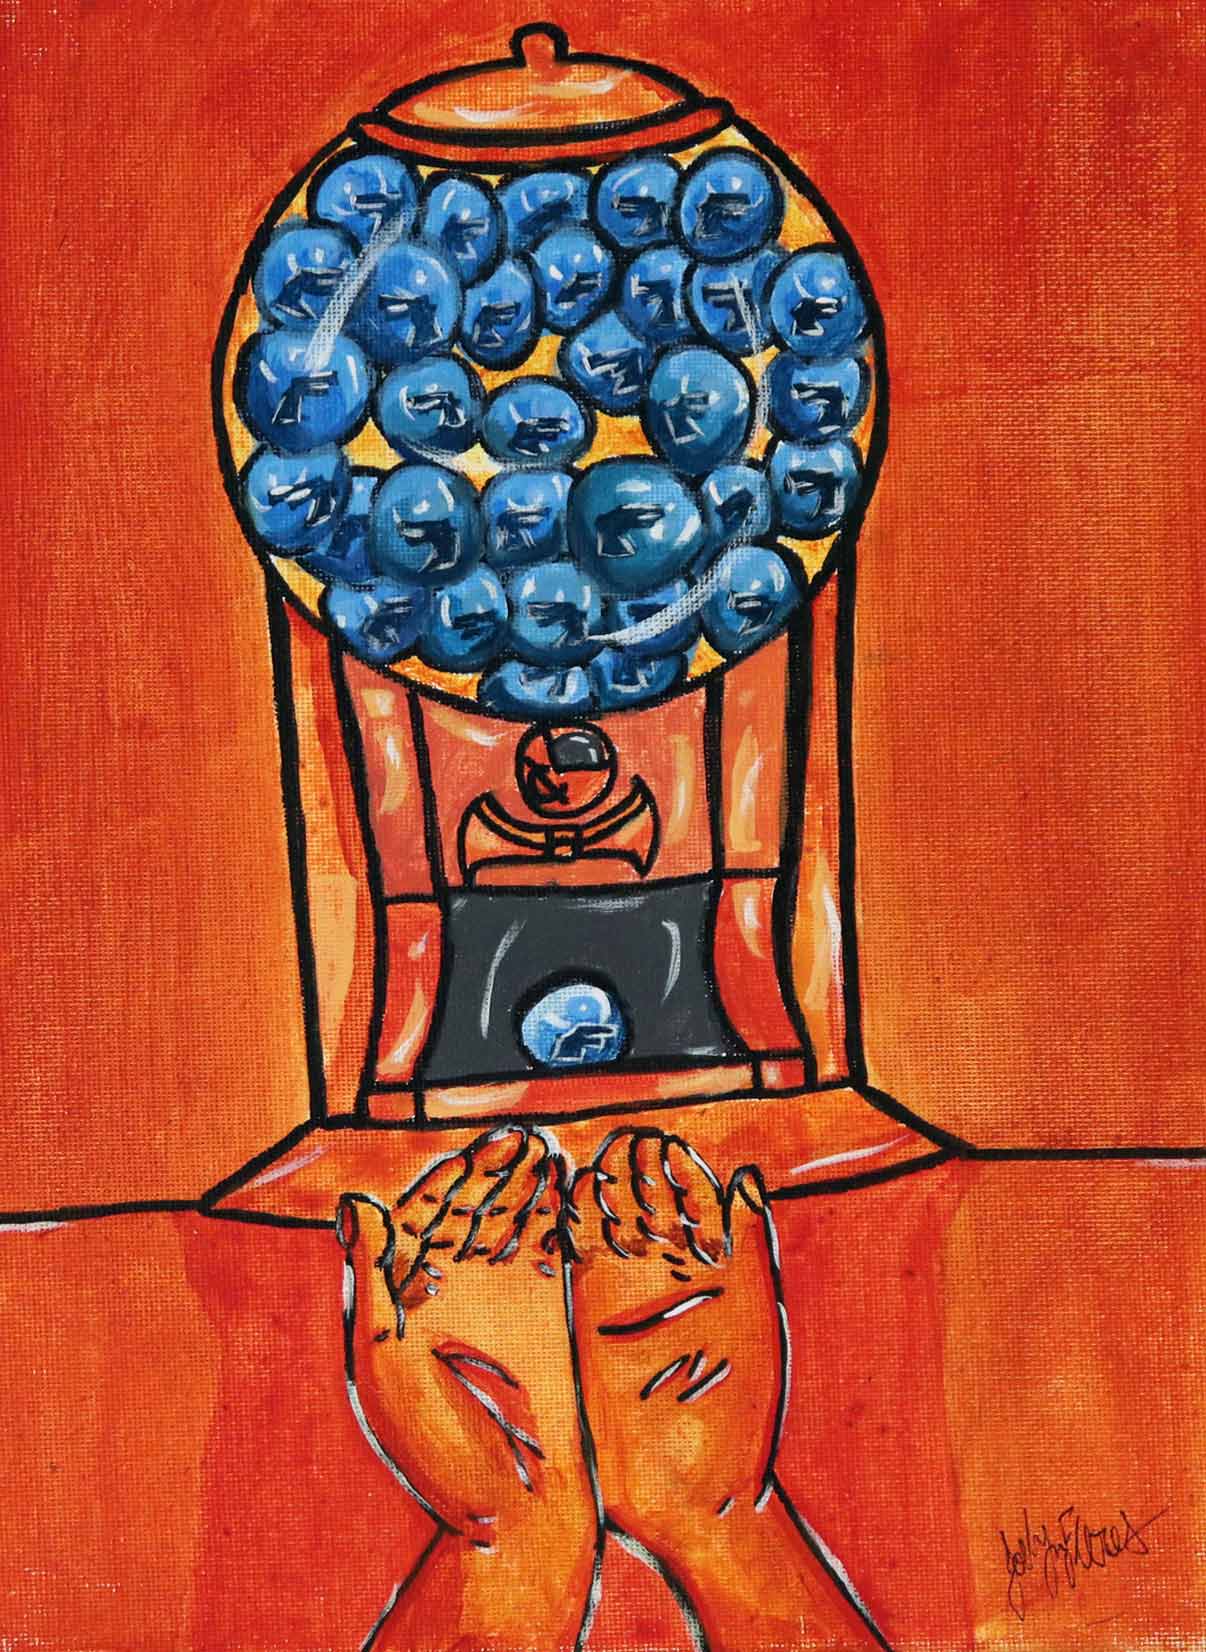 A painting of a gumball machine holding plastic balls with toy guns inside